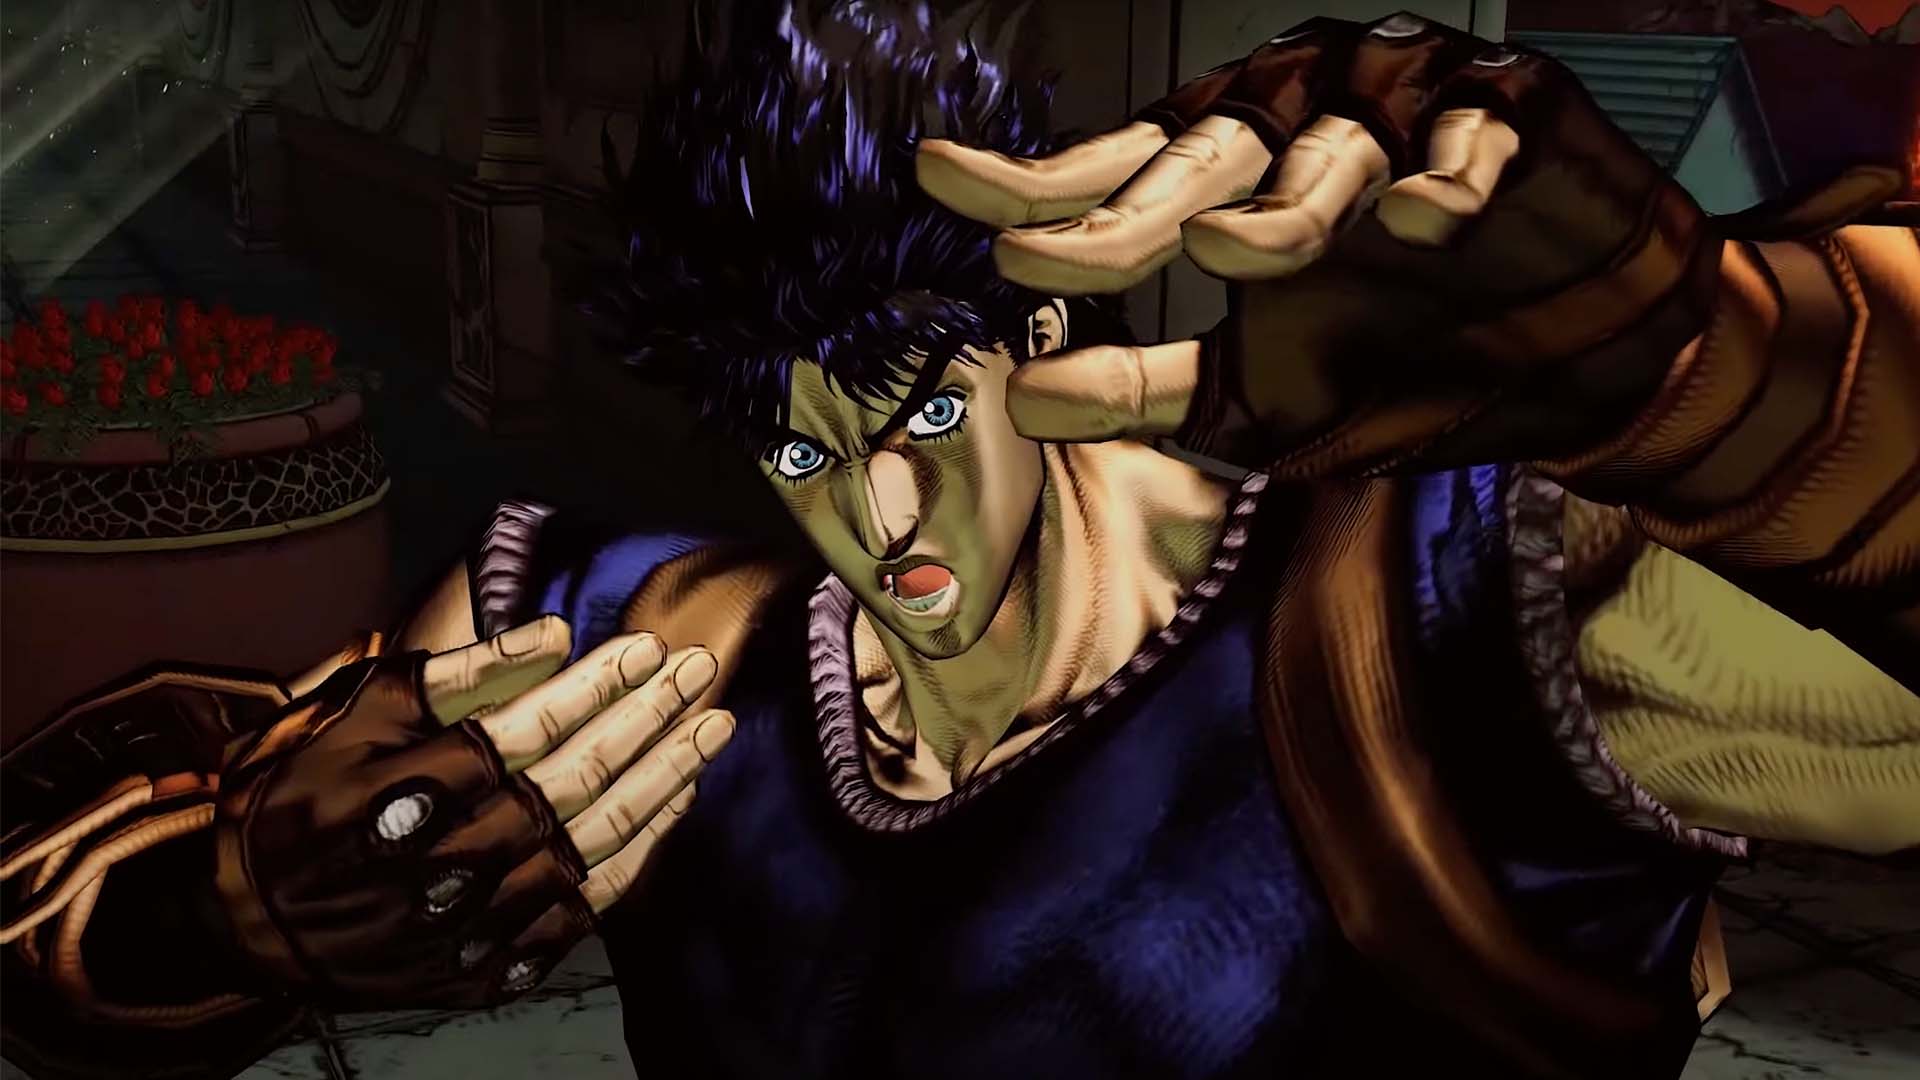 Jonathan's Sunlight Yellow Overdrive pose in various media :  r/StardustCrusaders